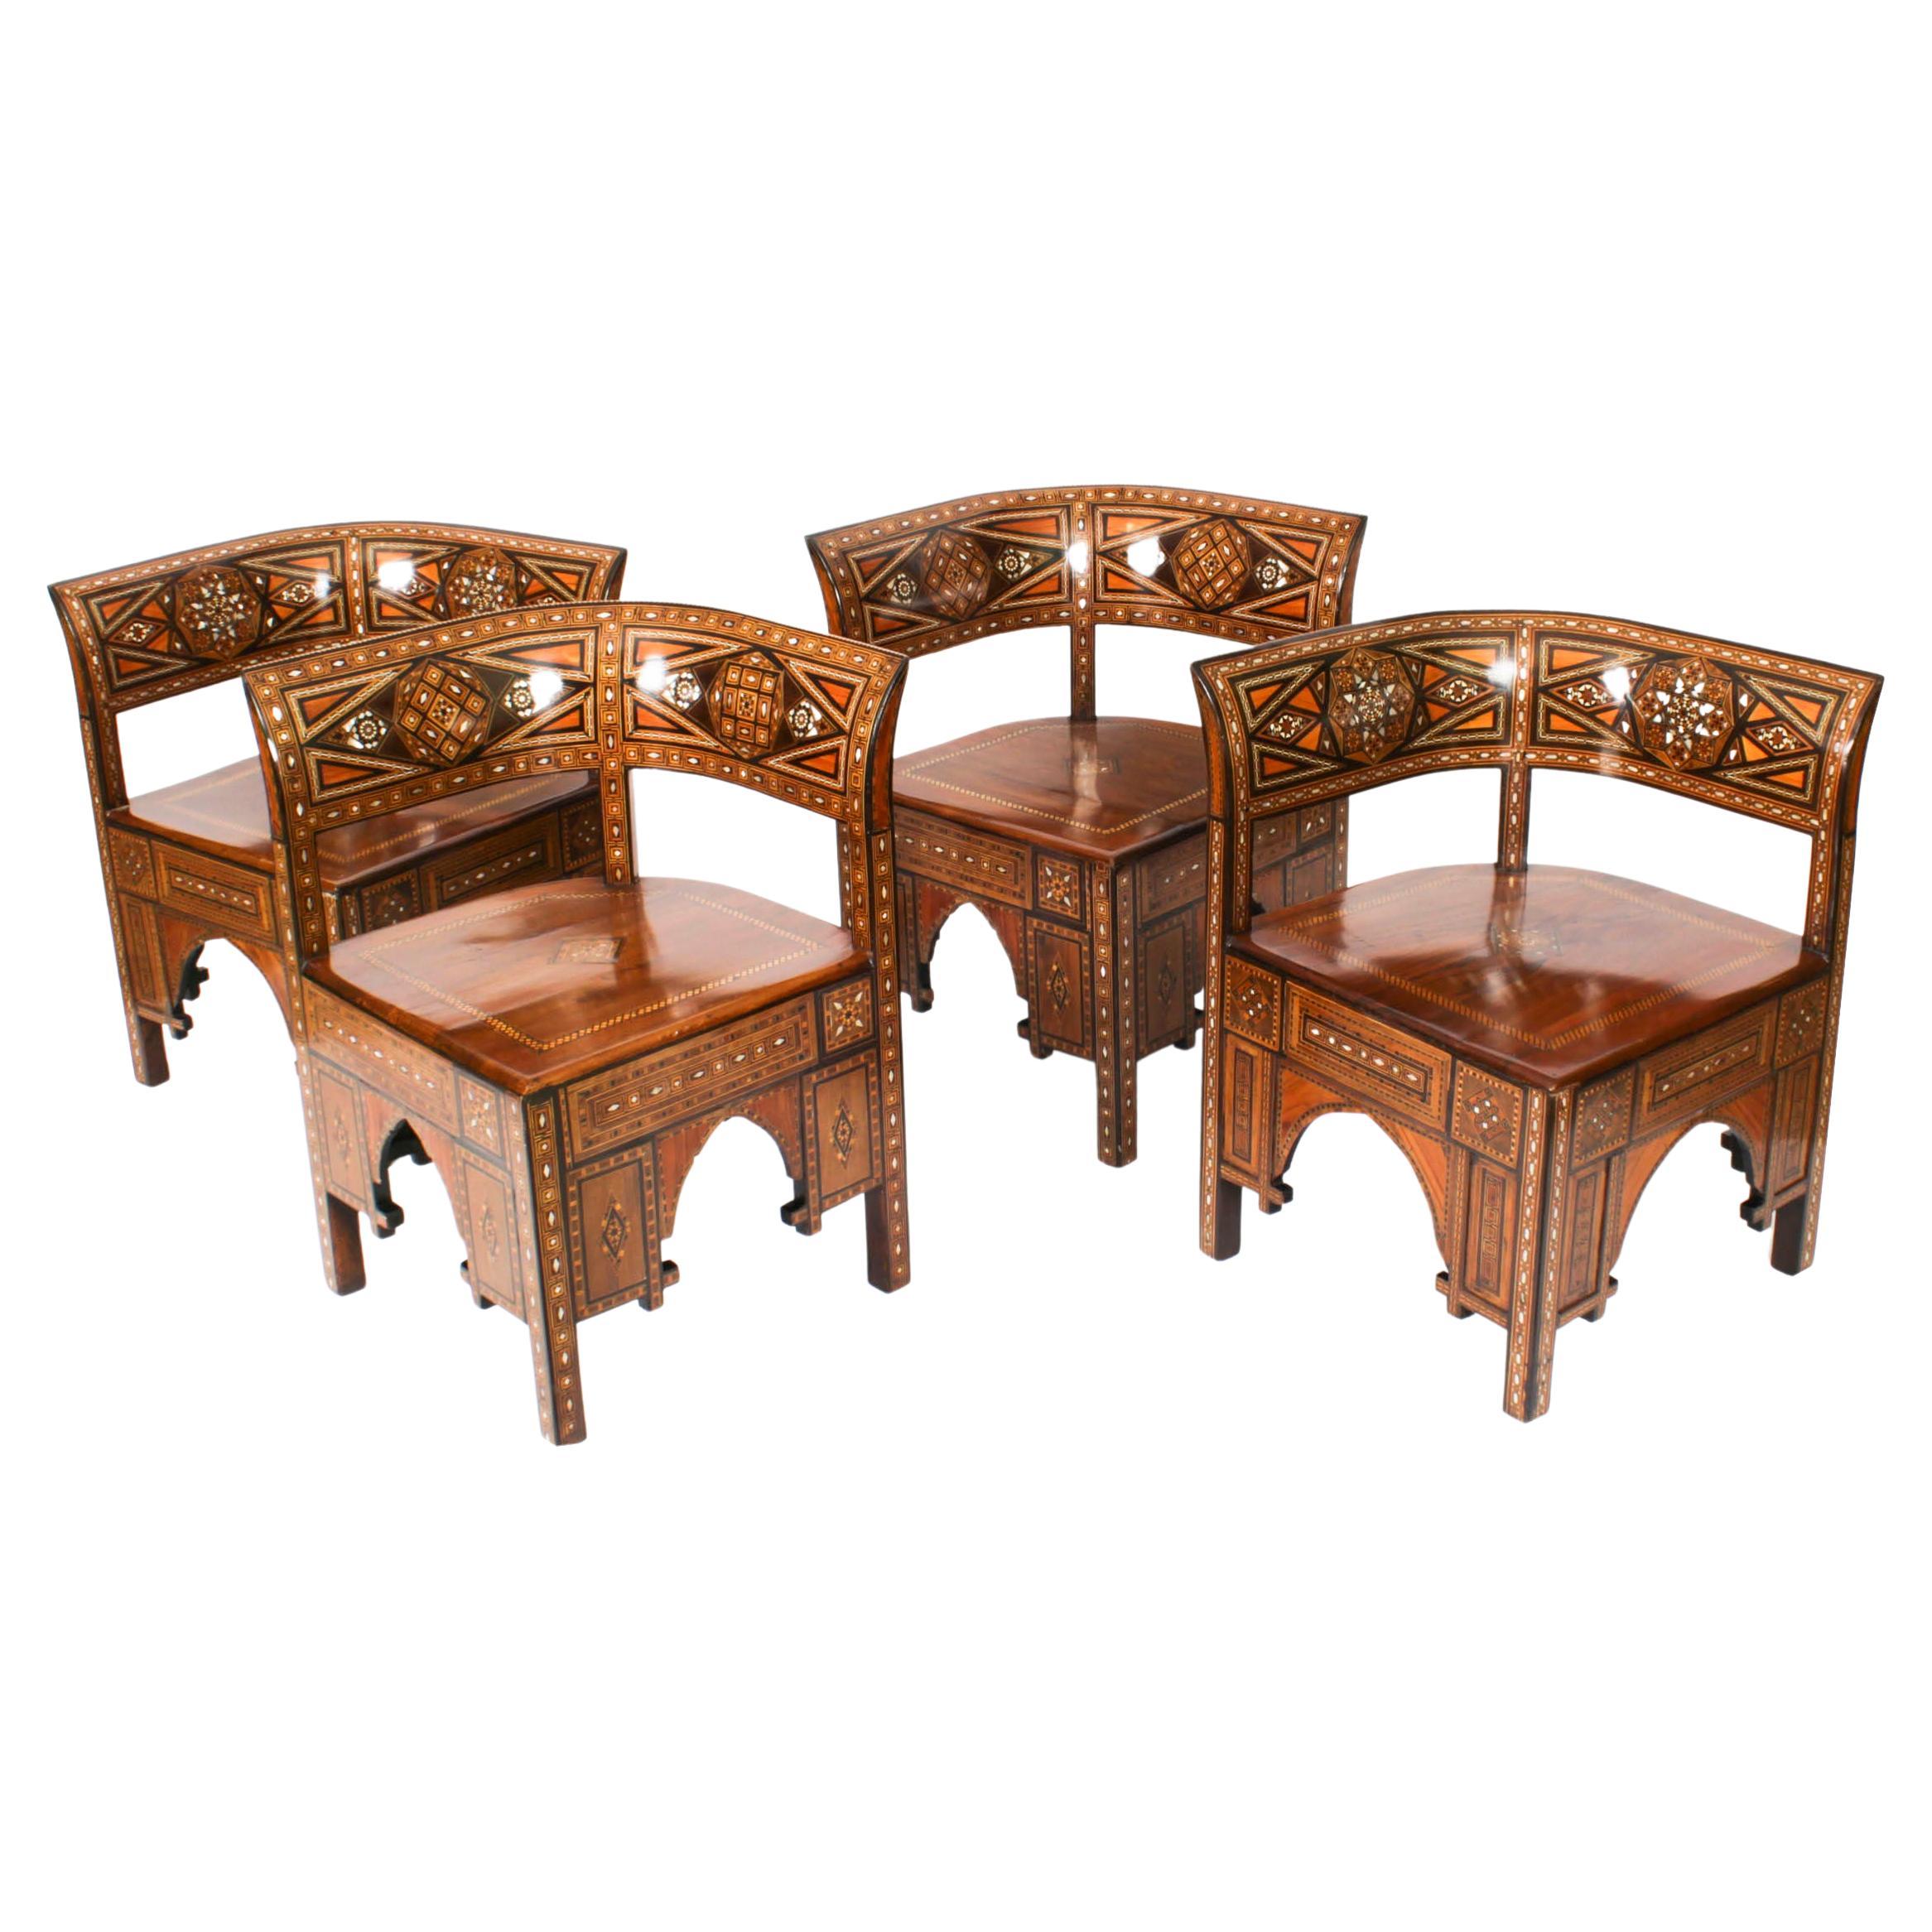 Antique Set of 4 Syrian Parquetry Inlaid Armchairs, Early 20th Century For Sale